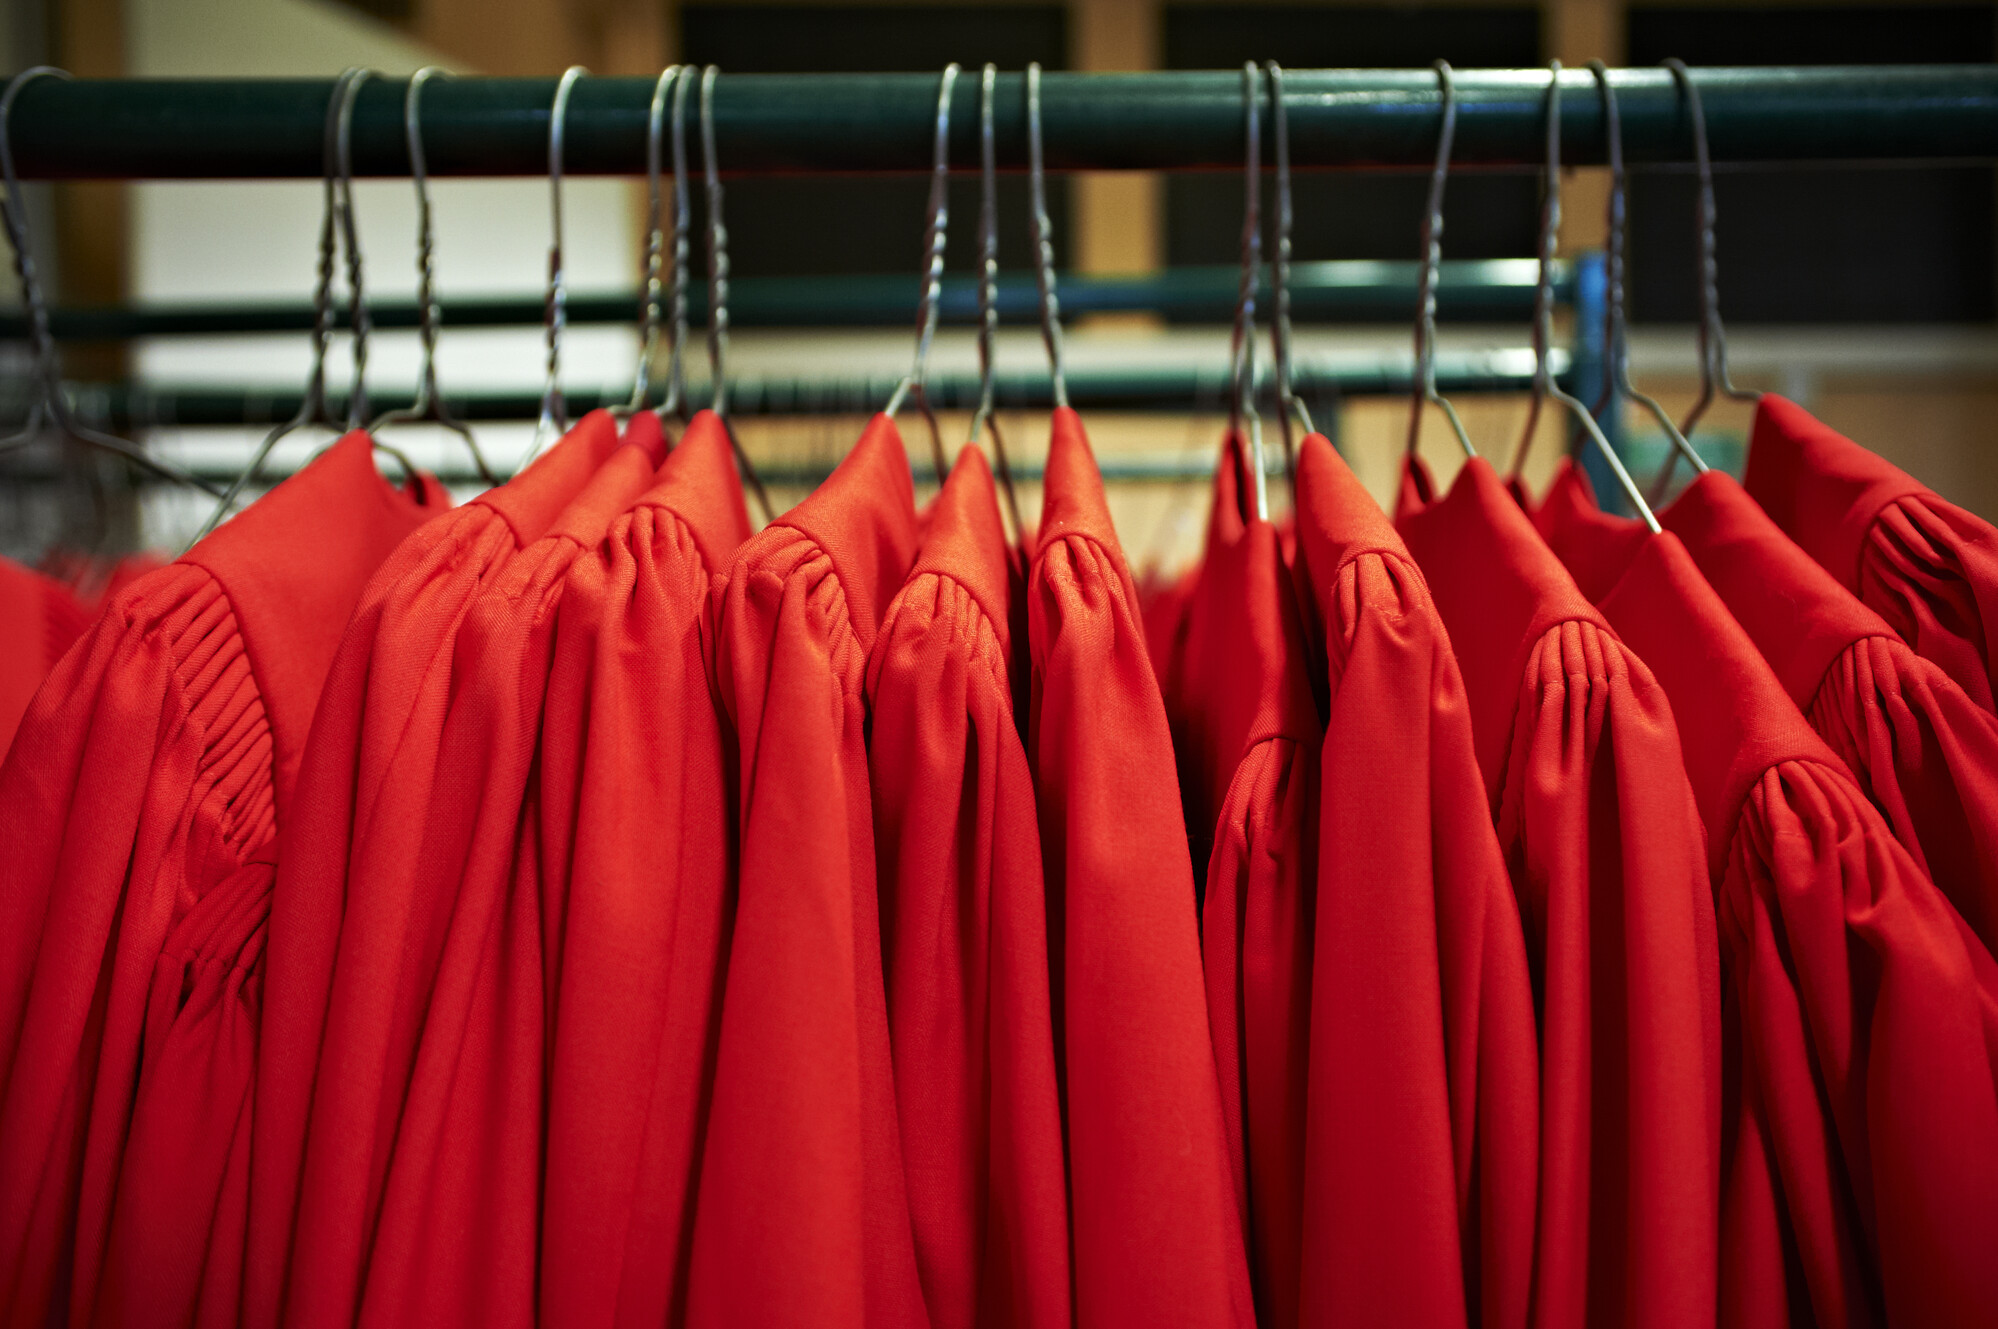 Academic Gowns and Robes hanging up